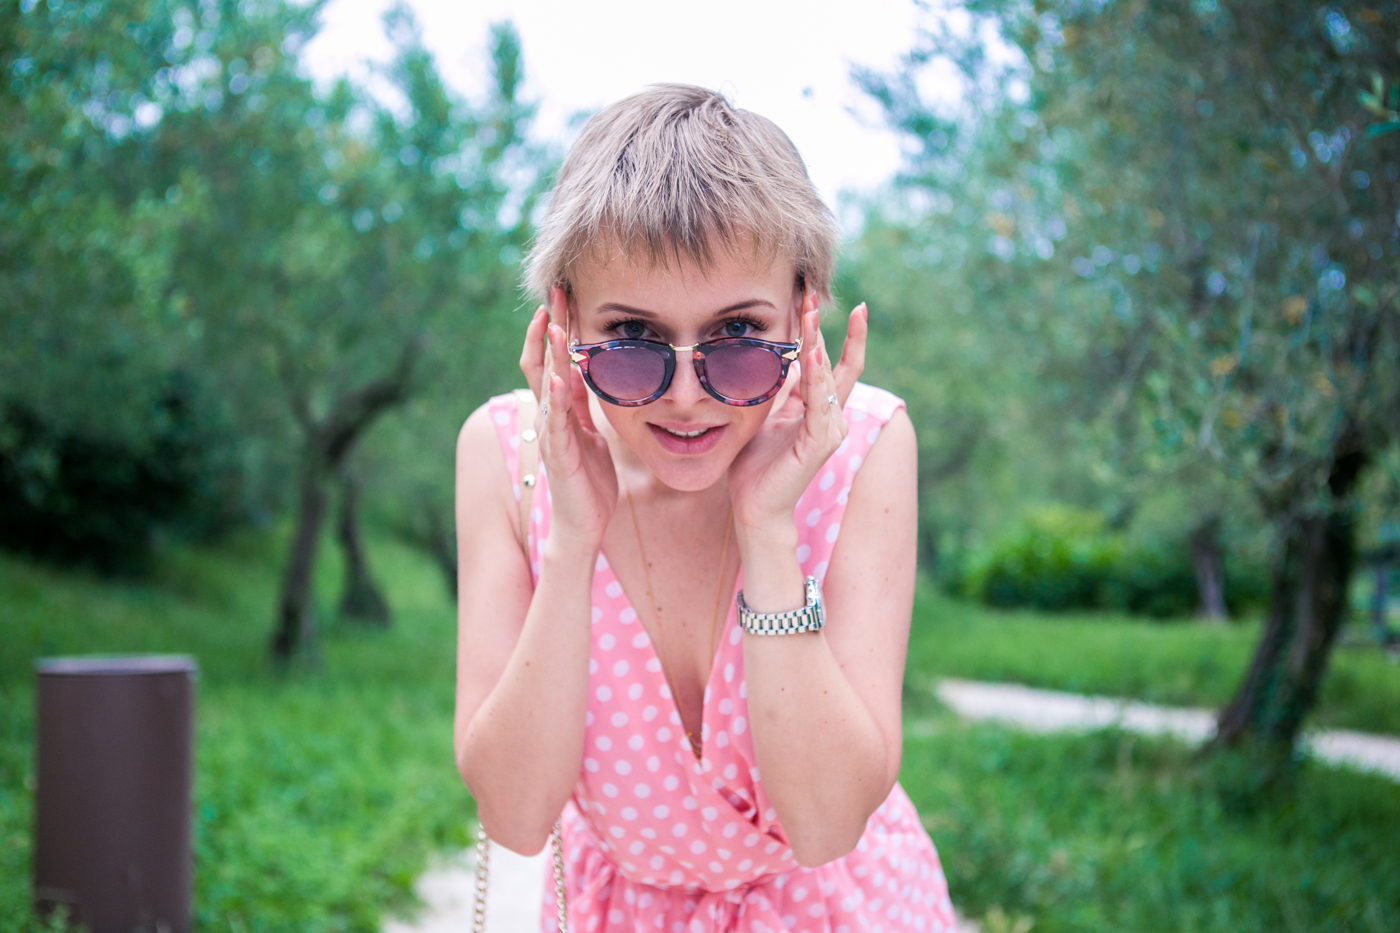 thecablook darya kamalova fashion blog street style sirmione italy verona jumpsuit rompers polka dots pixie cut short hair zanotti sandals rebecca minkoff bag vj style sunnies sunglasses outfit-136